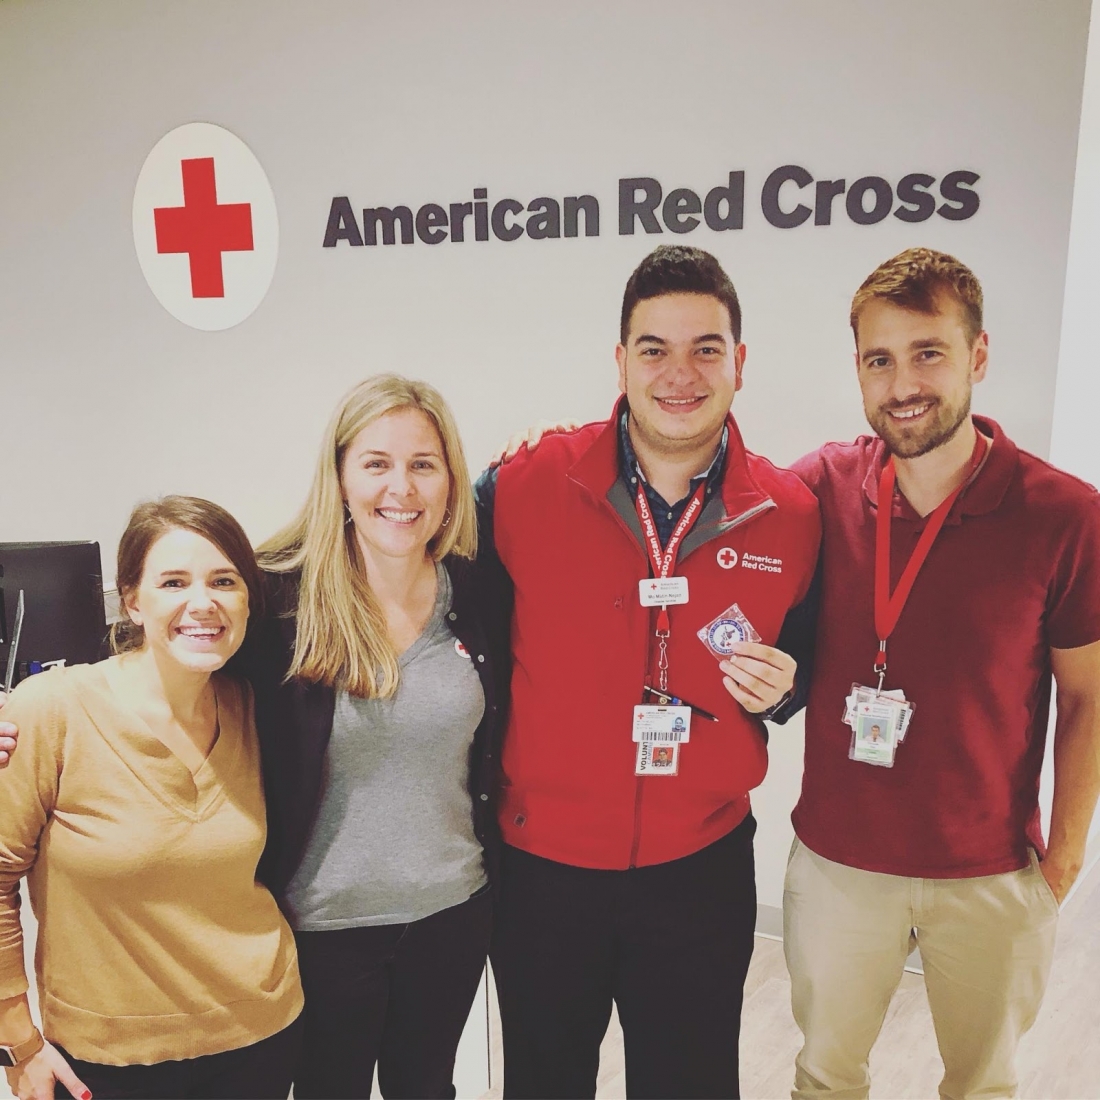 A group of four people posing for a photo in front of an "American Red Cross" logo. 